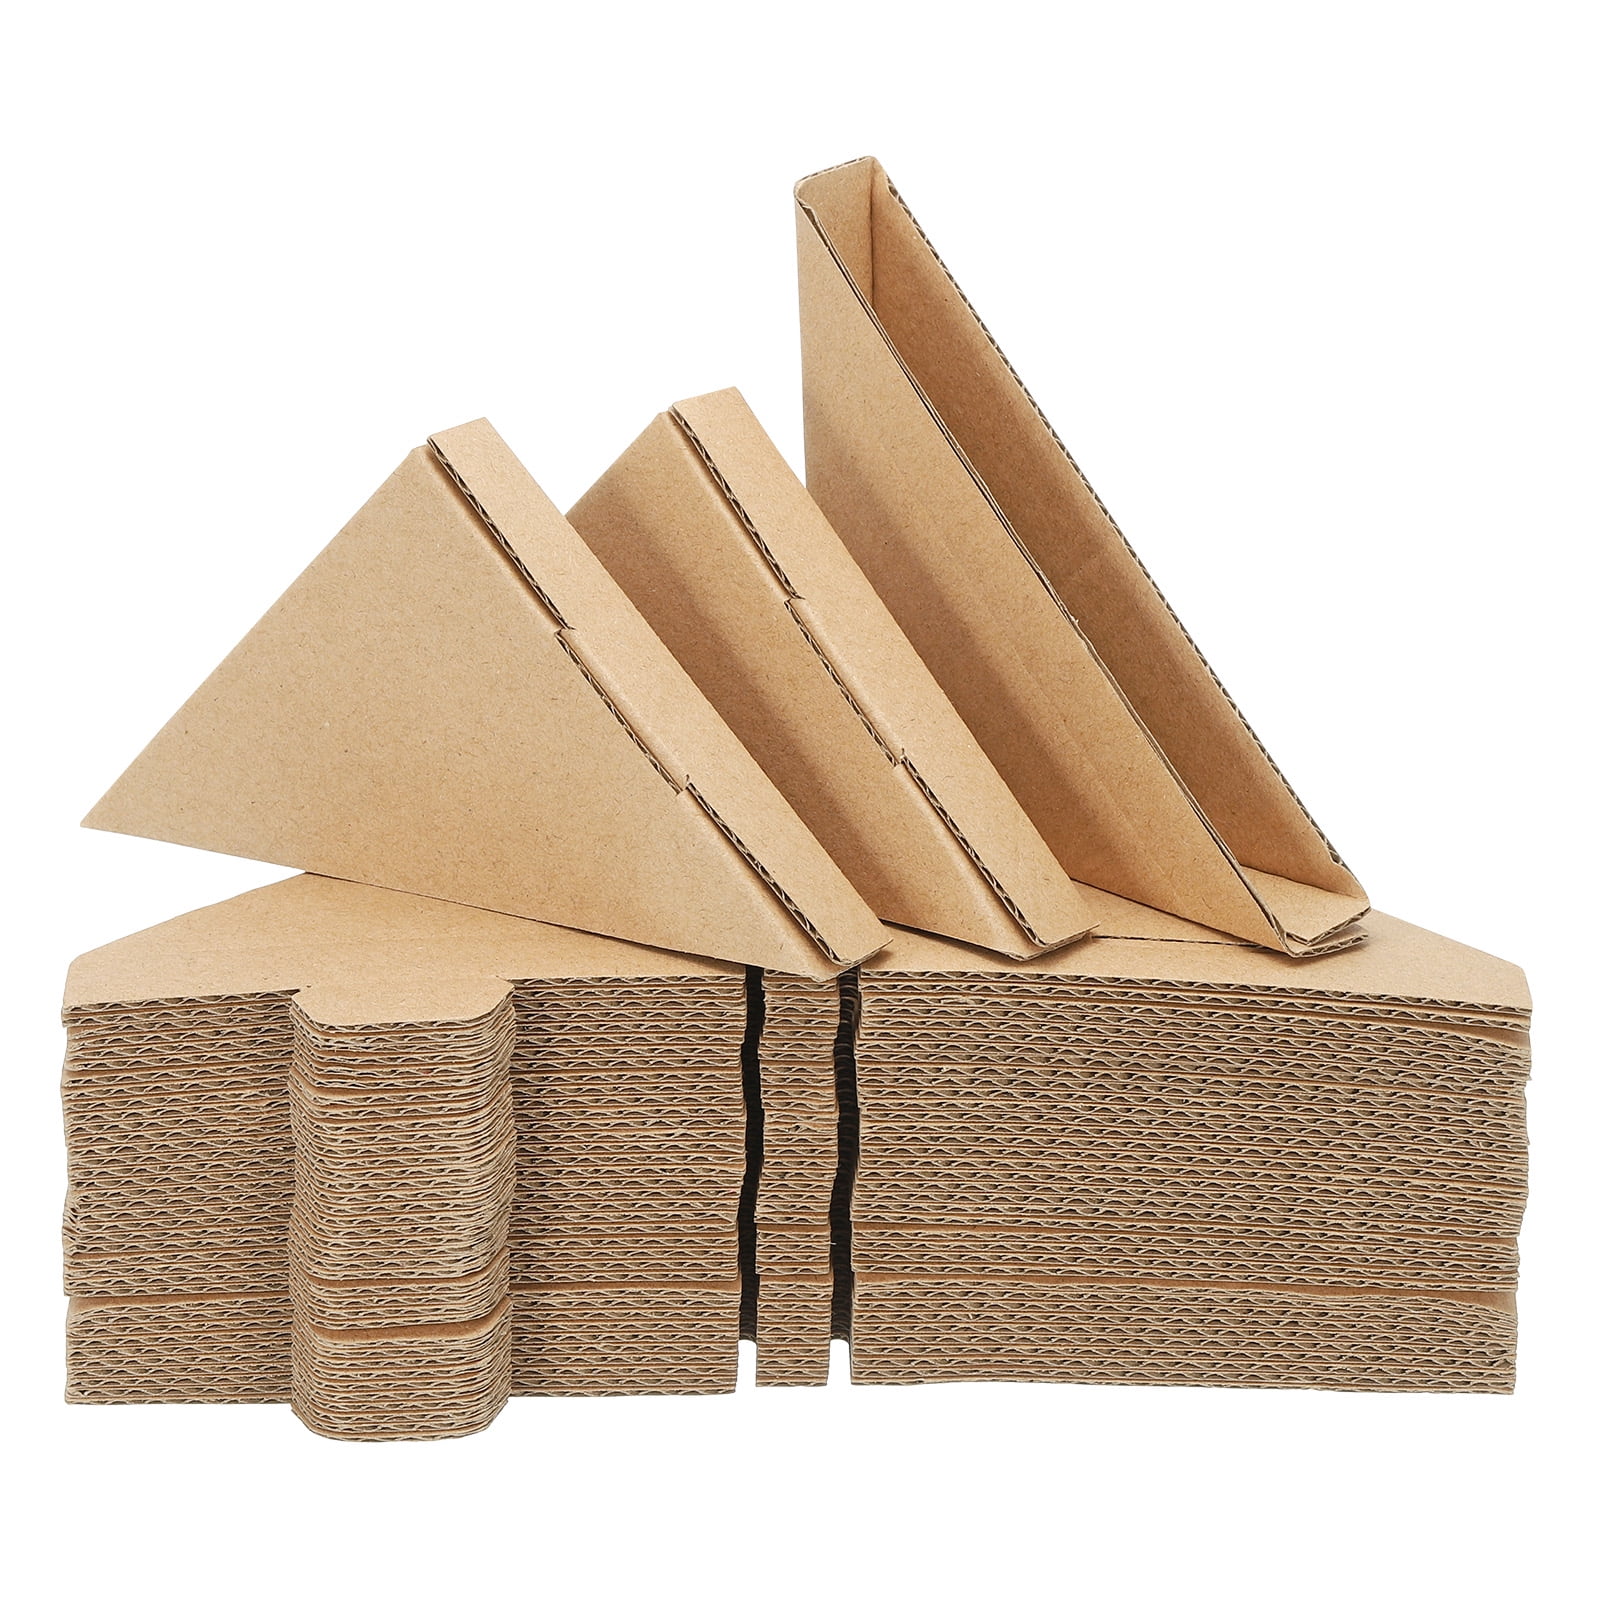 Adjustable Cardboard Corner Protector, Cardboard Edges Protector 2cm for Art, Packing, Shipping Supplies Pack of 60, Size: 3.5 x 3.5 x 0.8, Brown